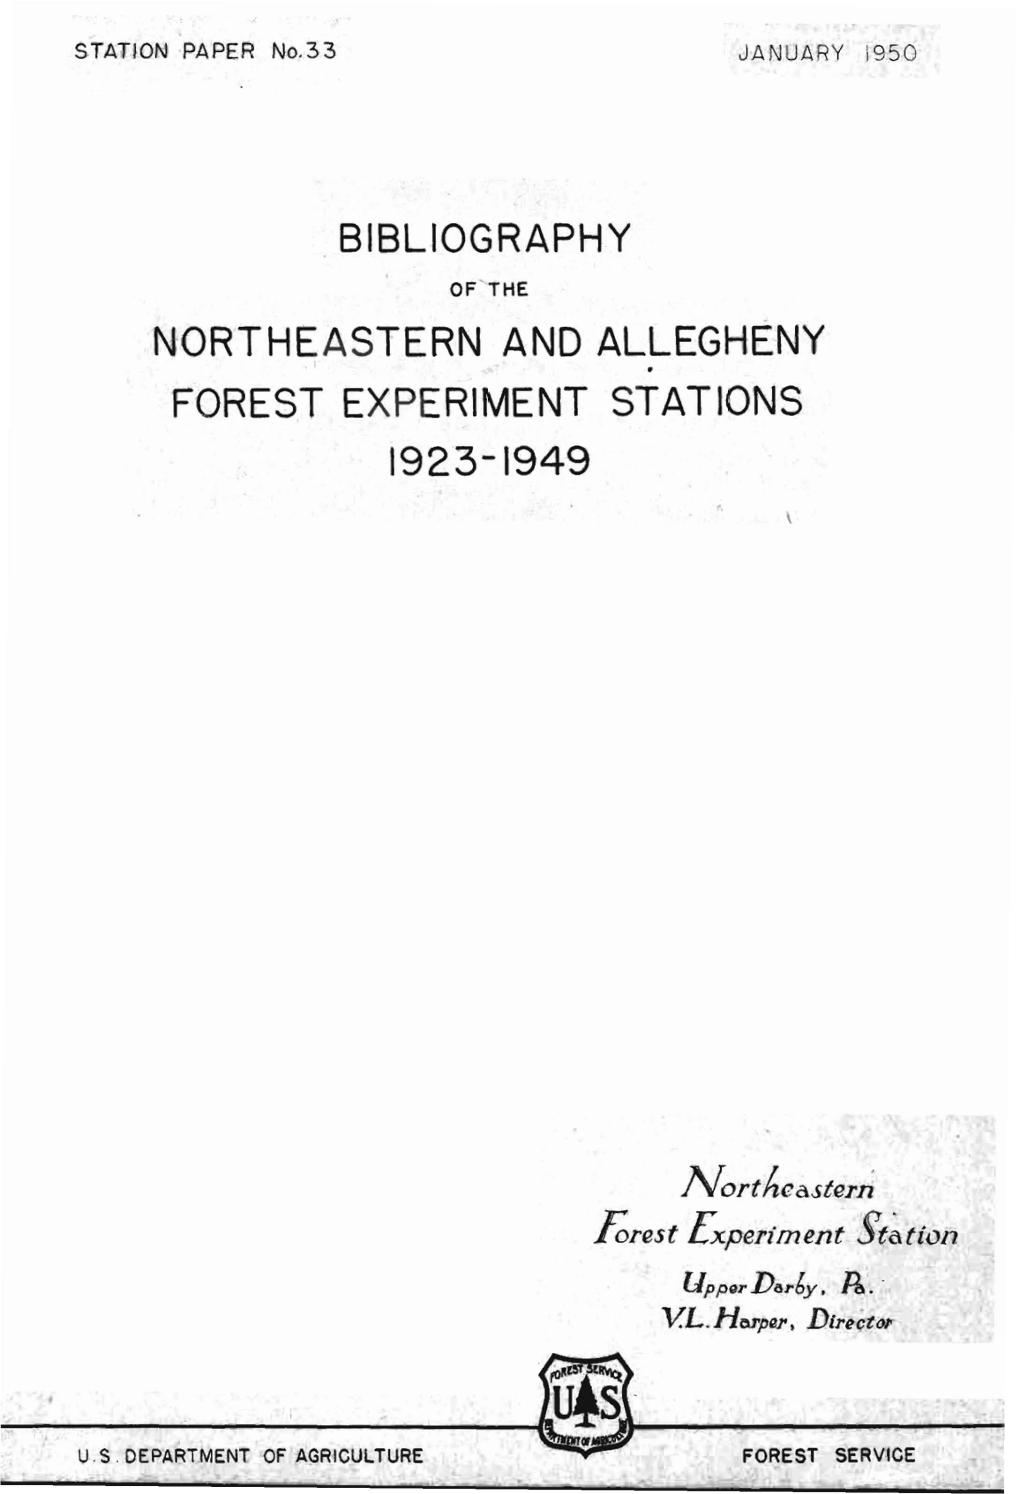 Bibliography of the Northeastern And